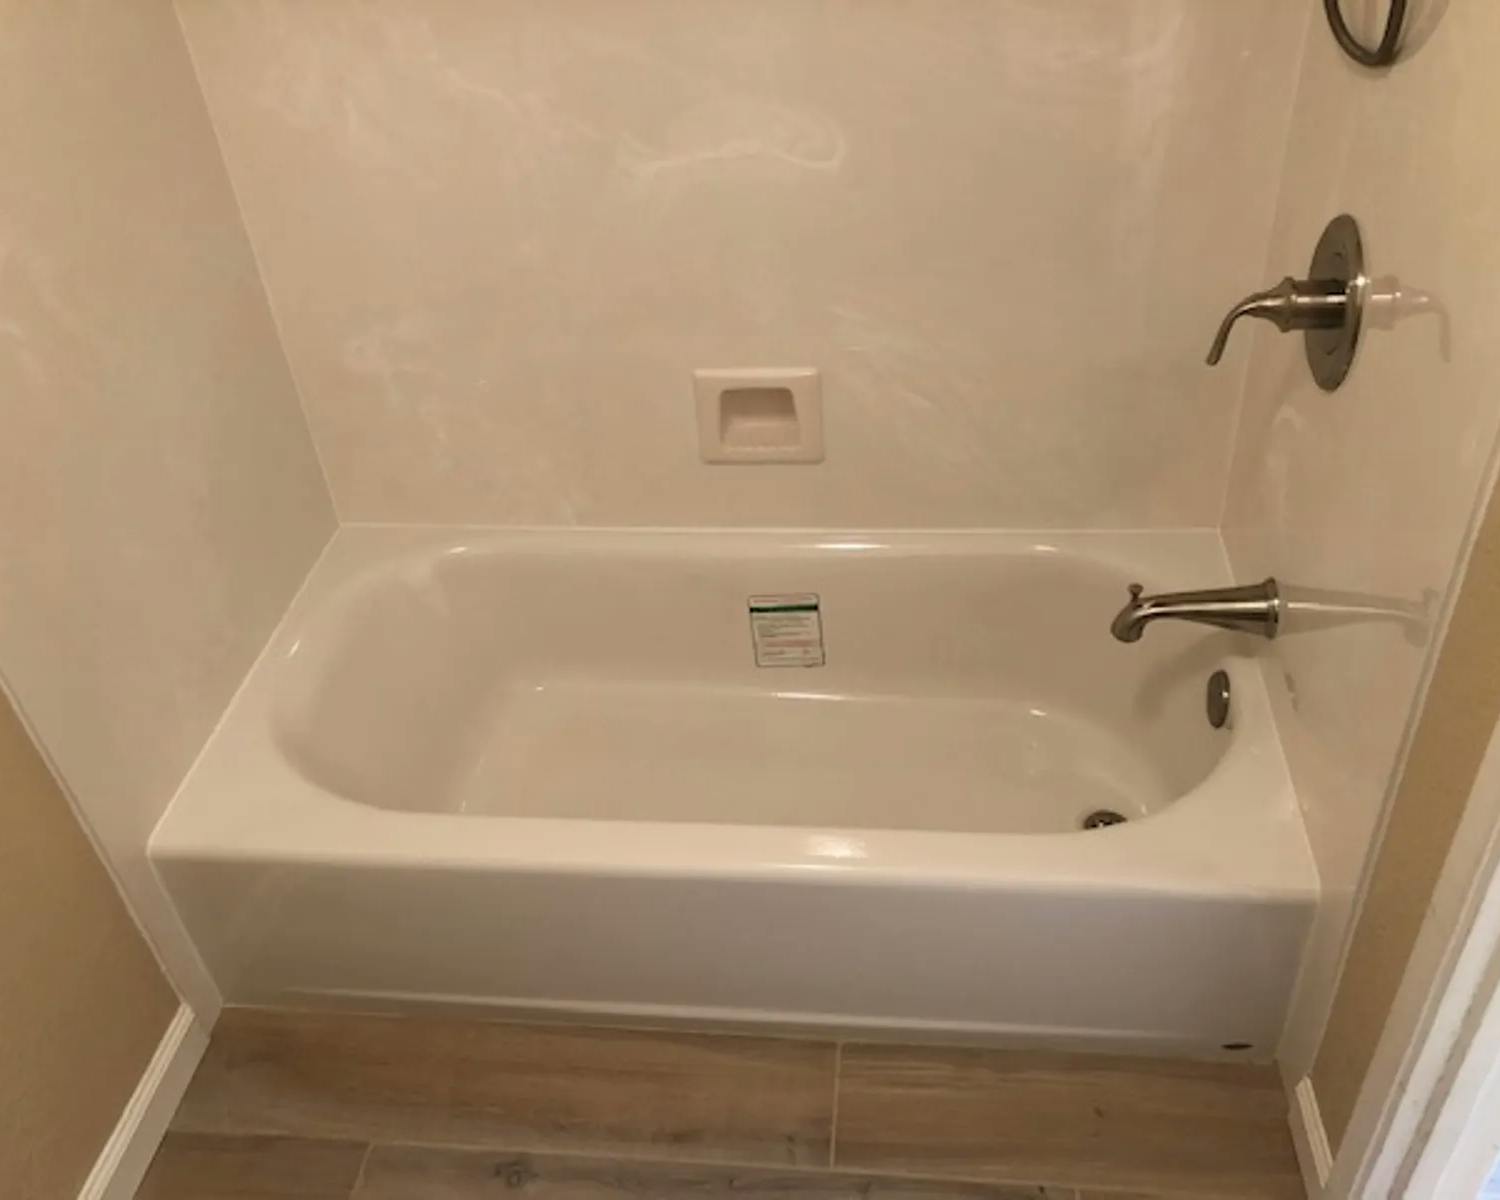 A white bathtub with a built-in shower, set against a beige wall. A small recessed shelf is on the wall for holding items, and a label is attached inside the tub. Bronze-colored fixtures, including the faucet and showerhead, are installed on the right side of the tub.